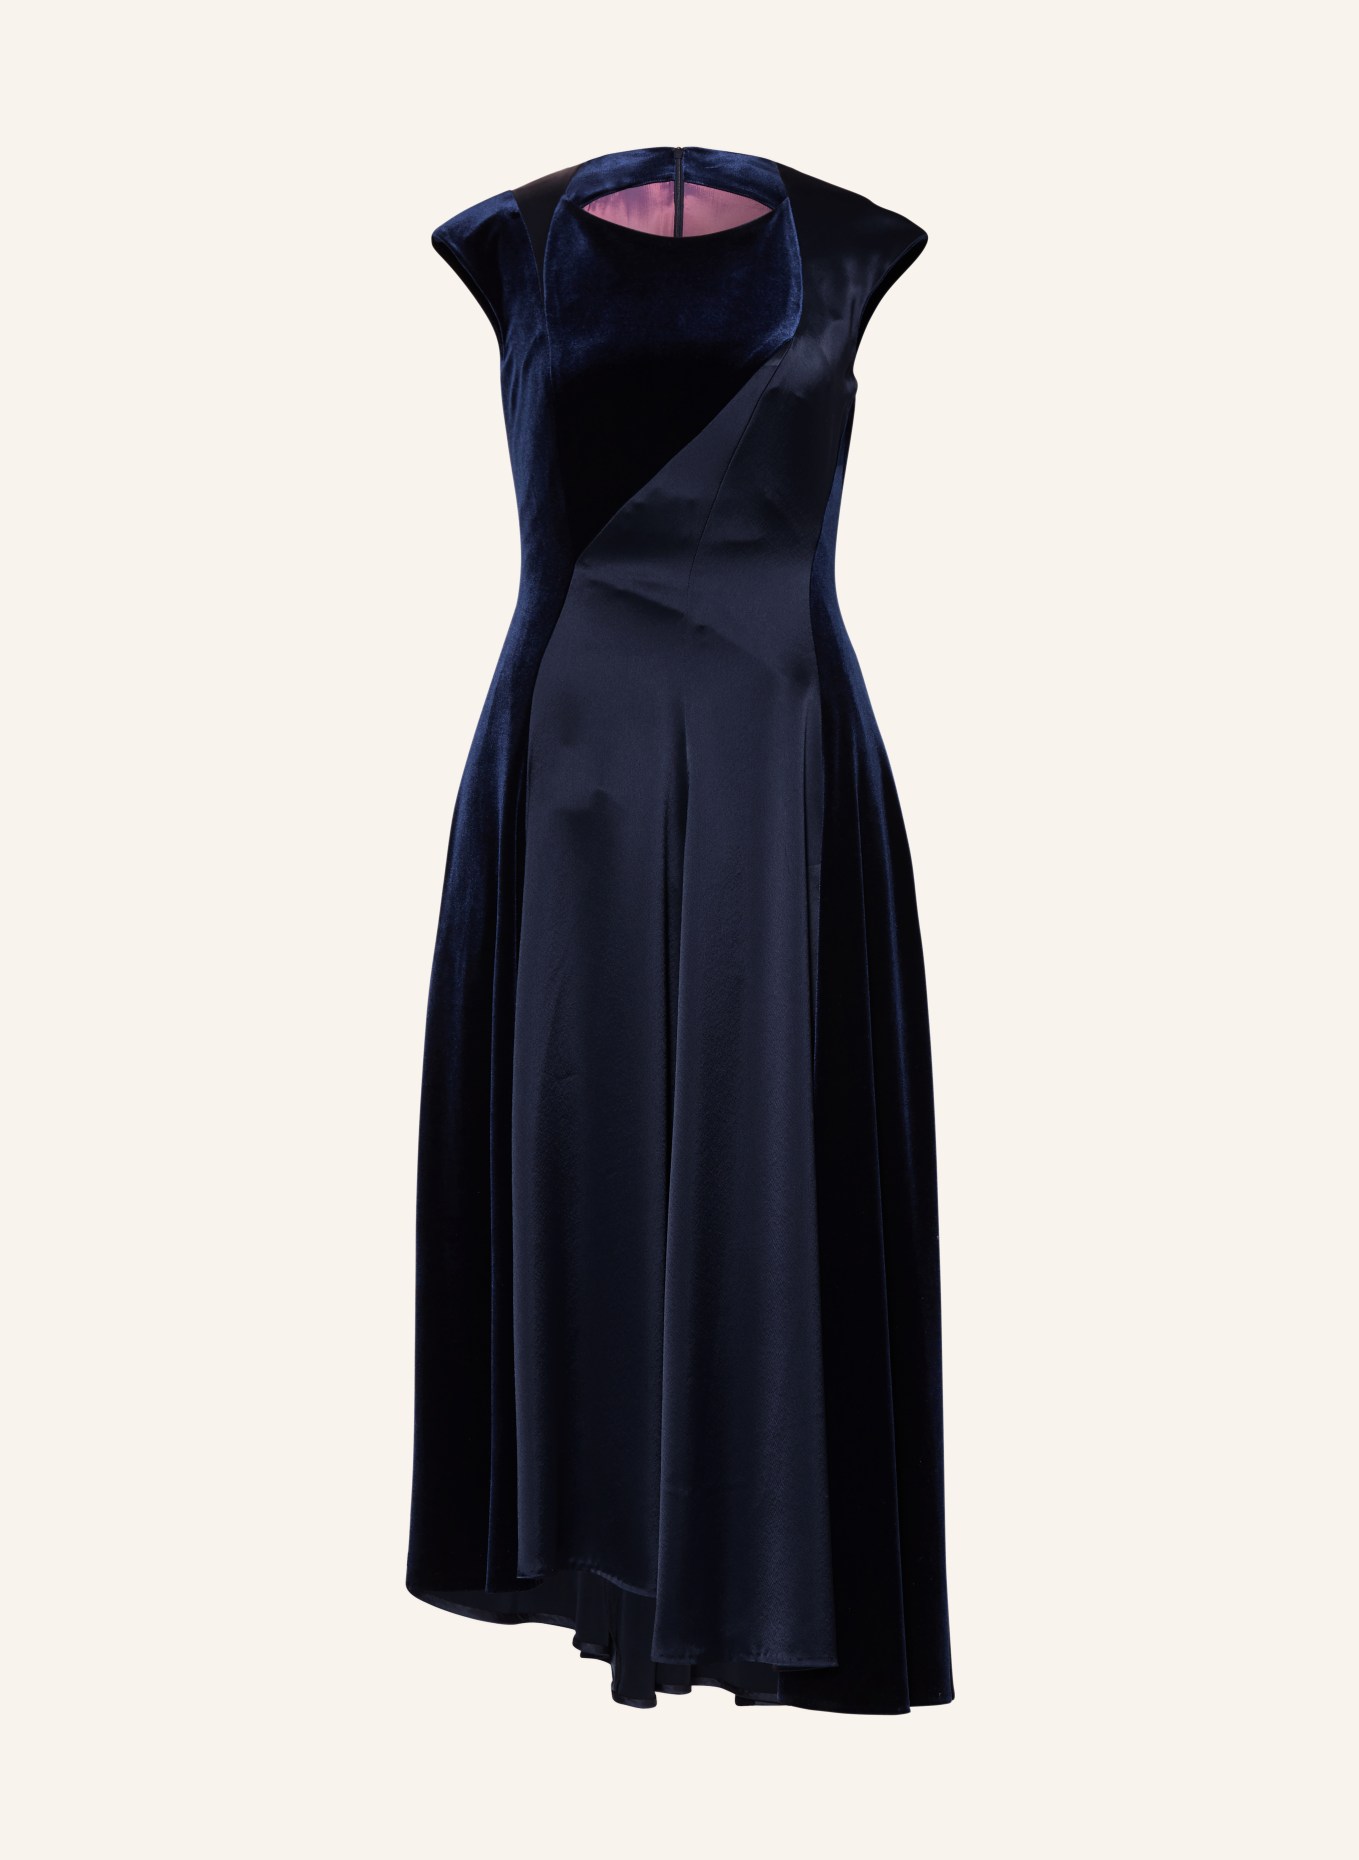 TALBOT RUNHOF Cocktail dress in mixed materials, Color: DARK BLUE (Image 1)